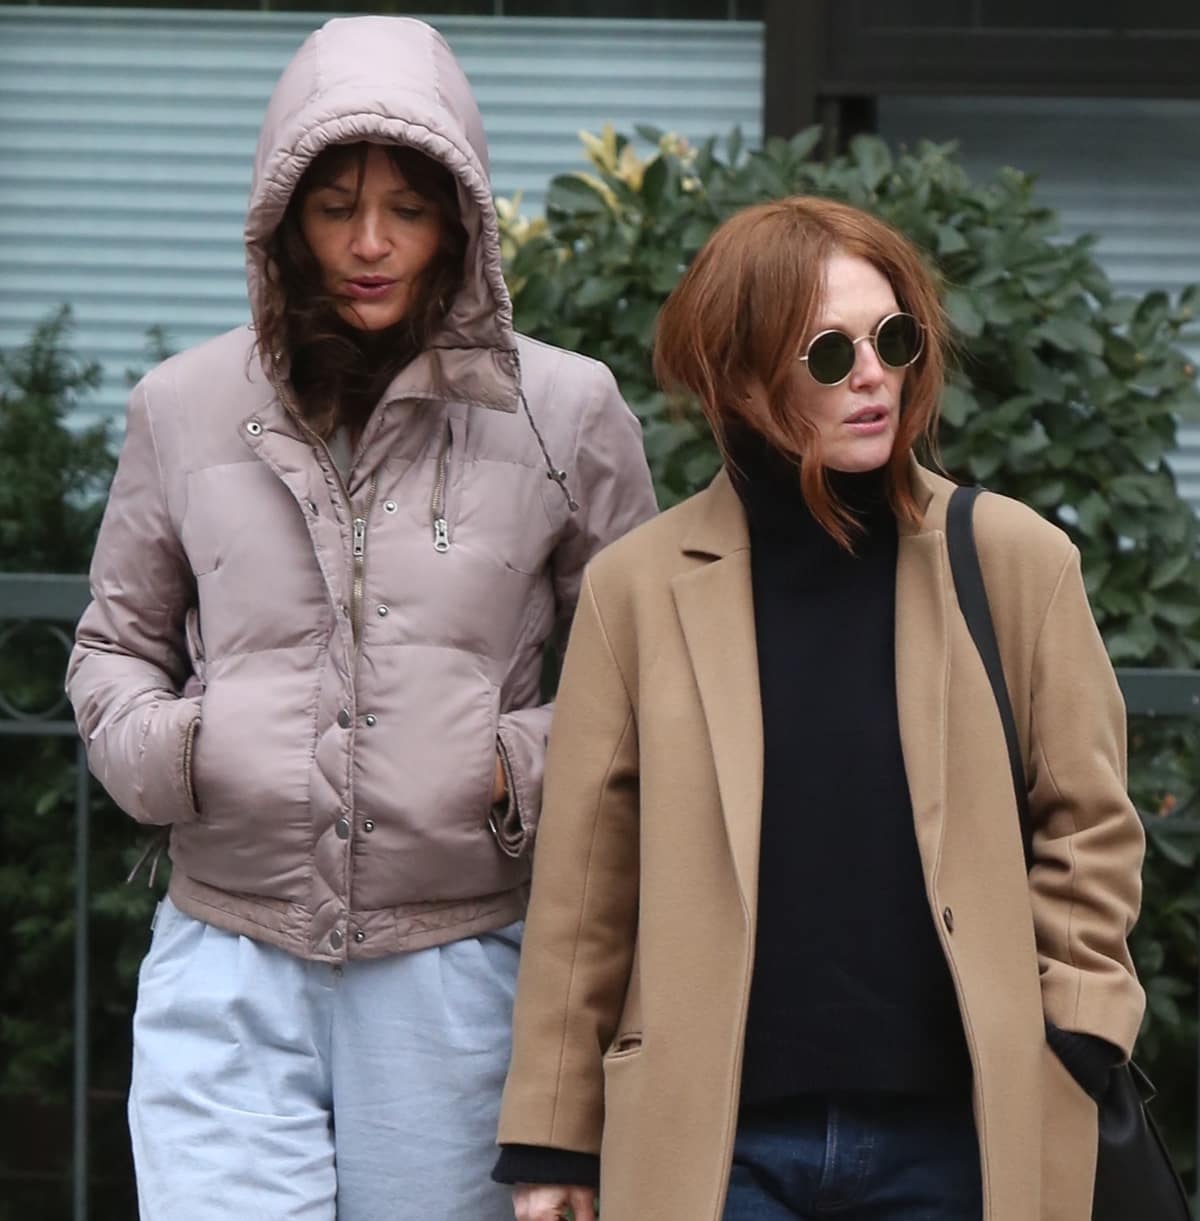 Julianne Moore and Helena Christensen leaving a restaurant after having lunch together in the West Village